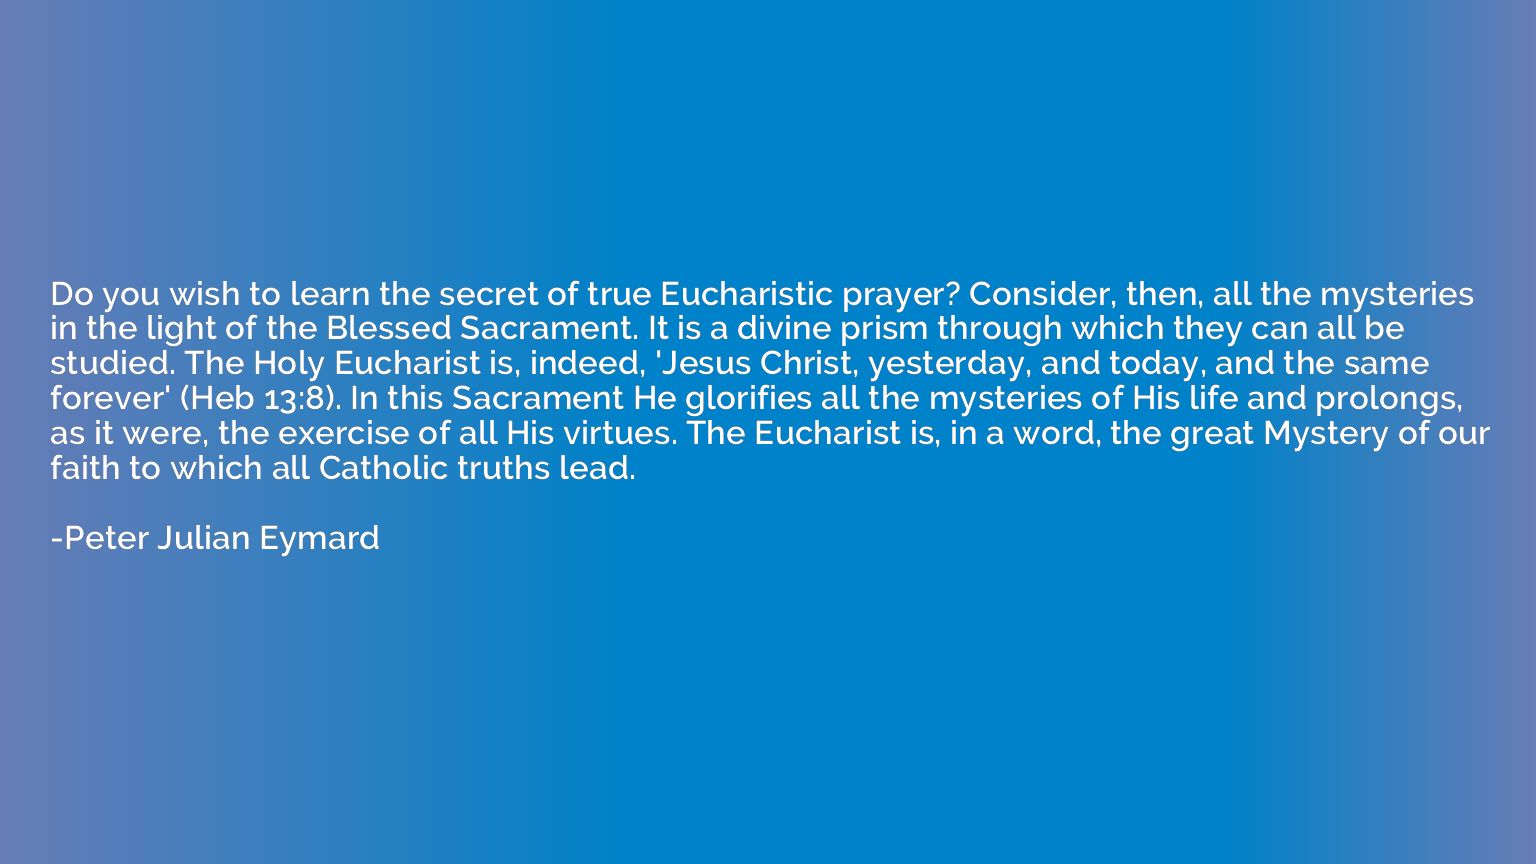 Do you wish to learn the secret of true Eucharistic prayer? 